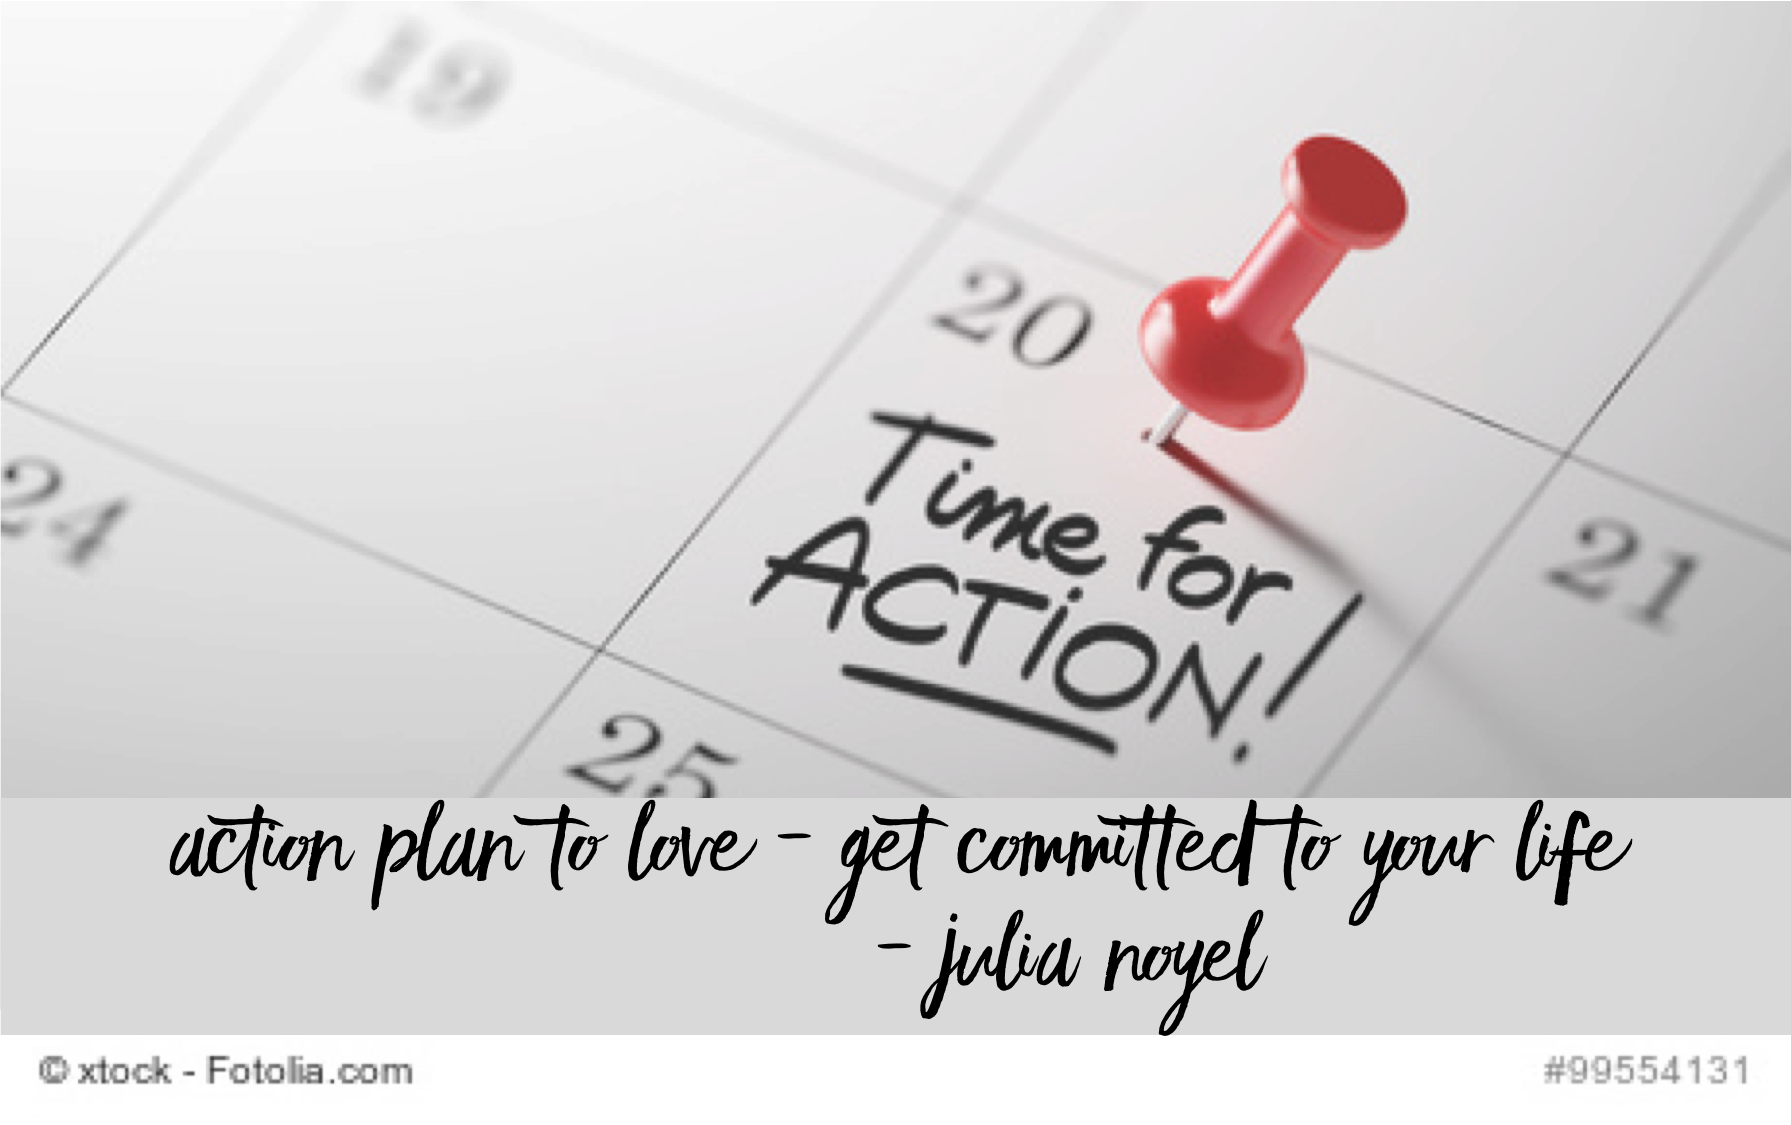 Action plan to love - get committed to your life